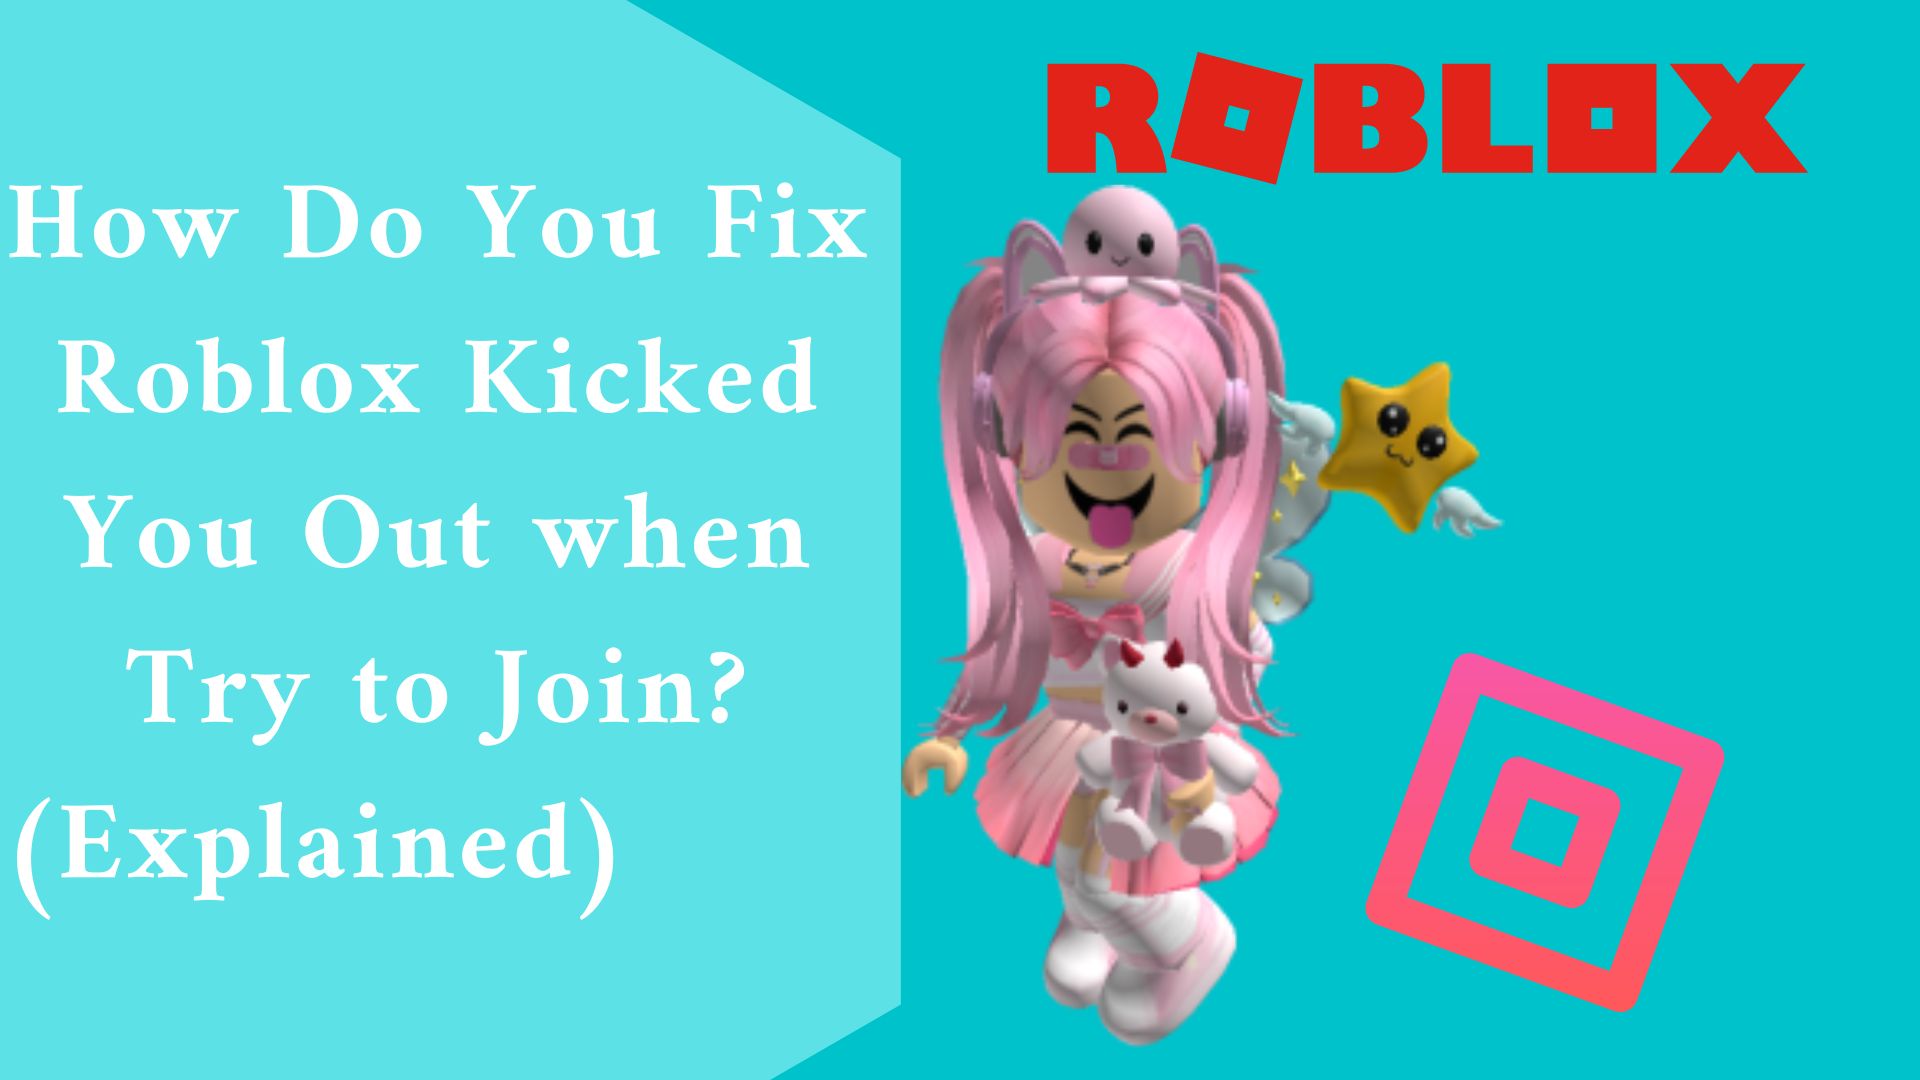 How Do You Fix Roblox Kicked You Out when Try to Join? (Explained)